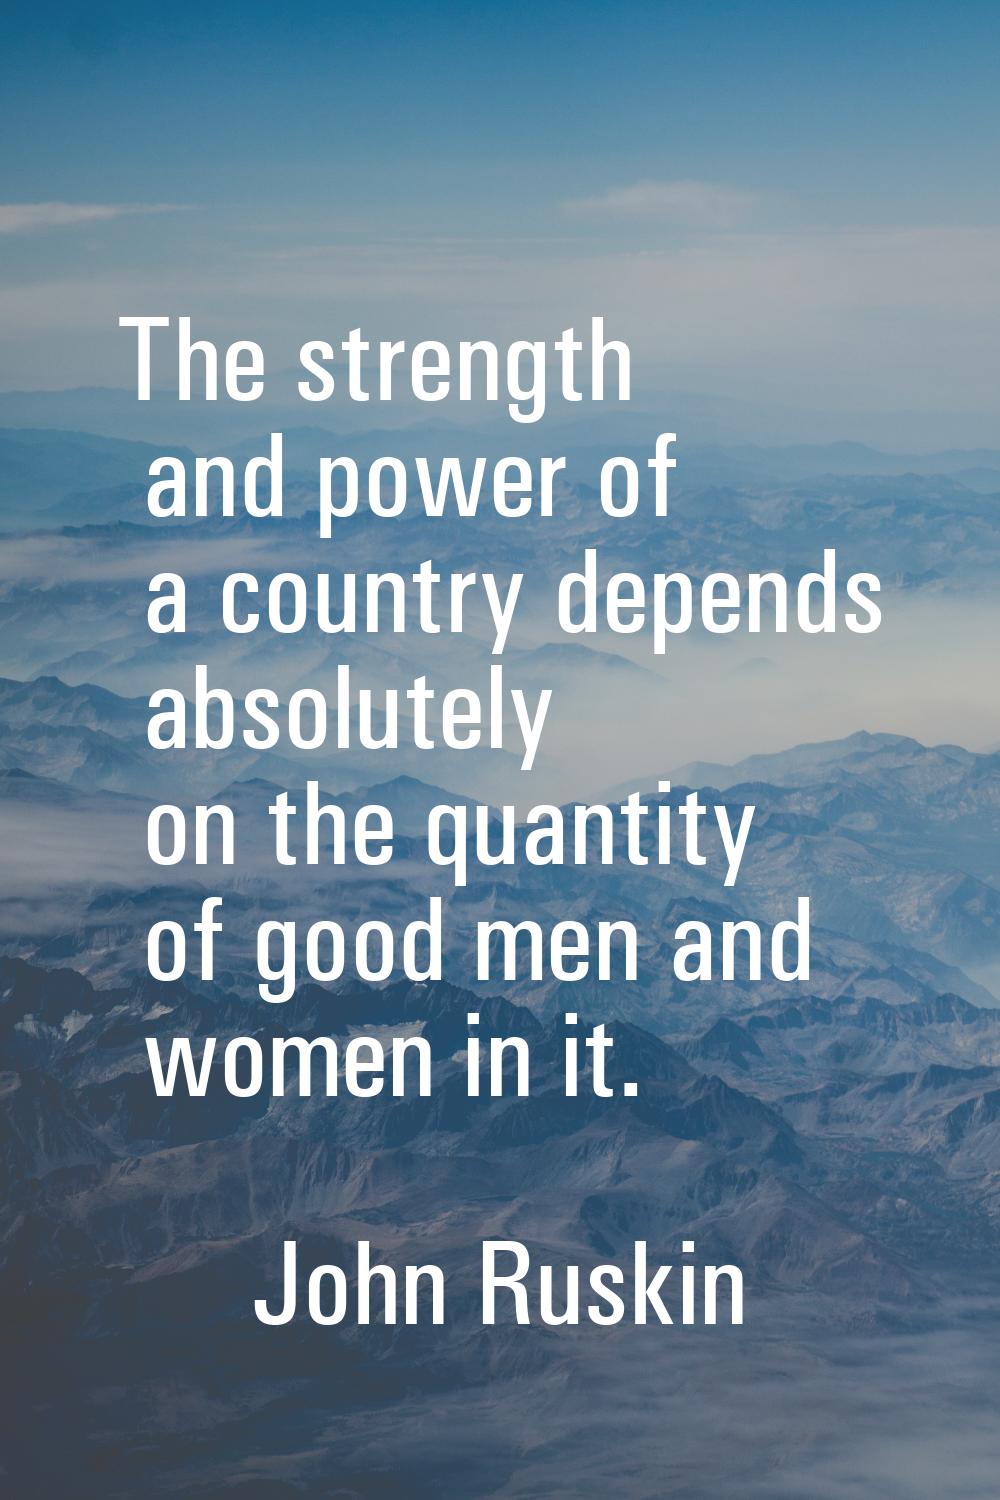 The strength and power of a country depends absolutely on the quantity of good men and women in it.